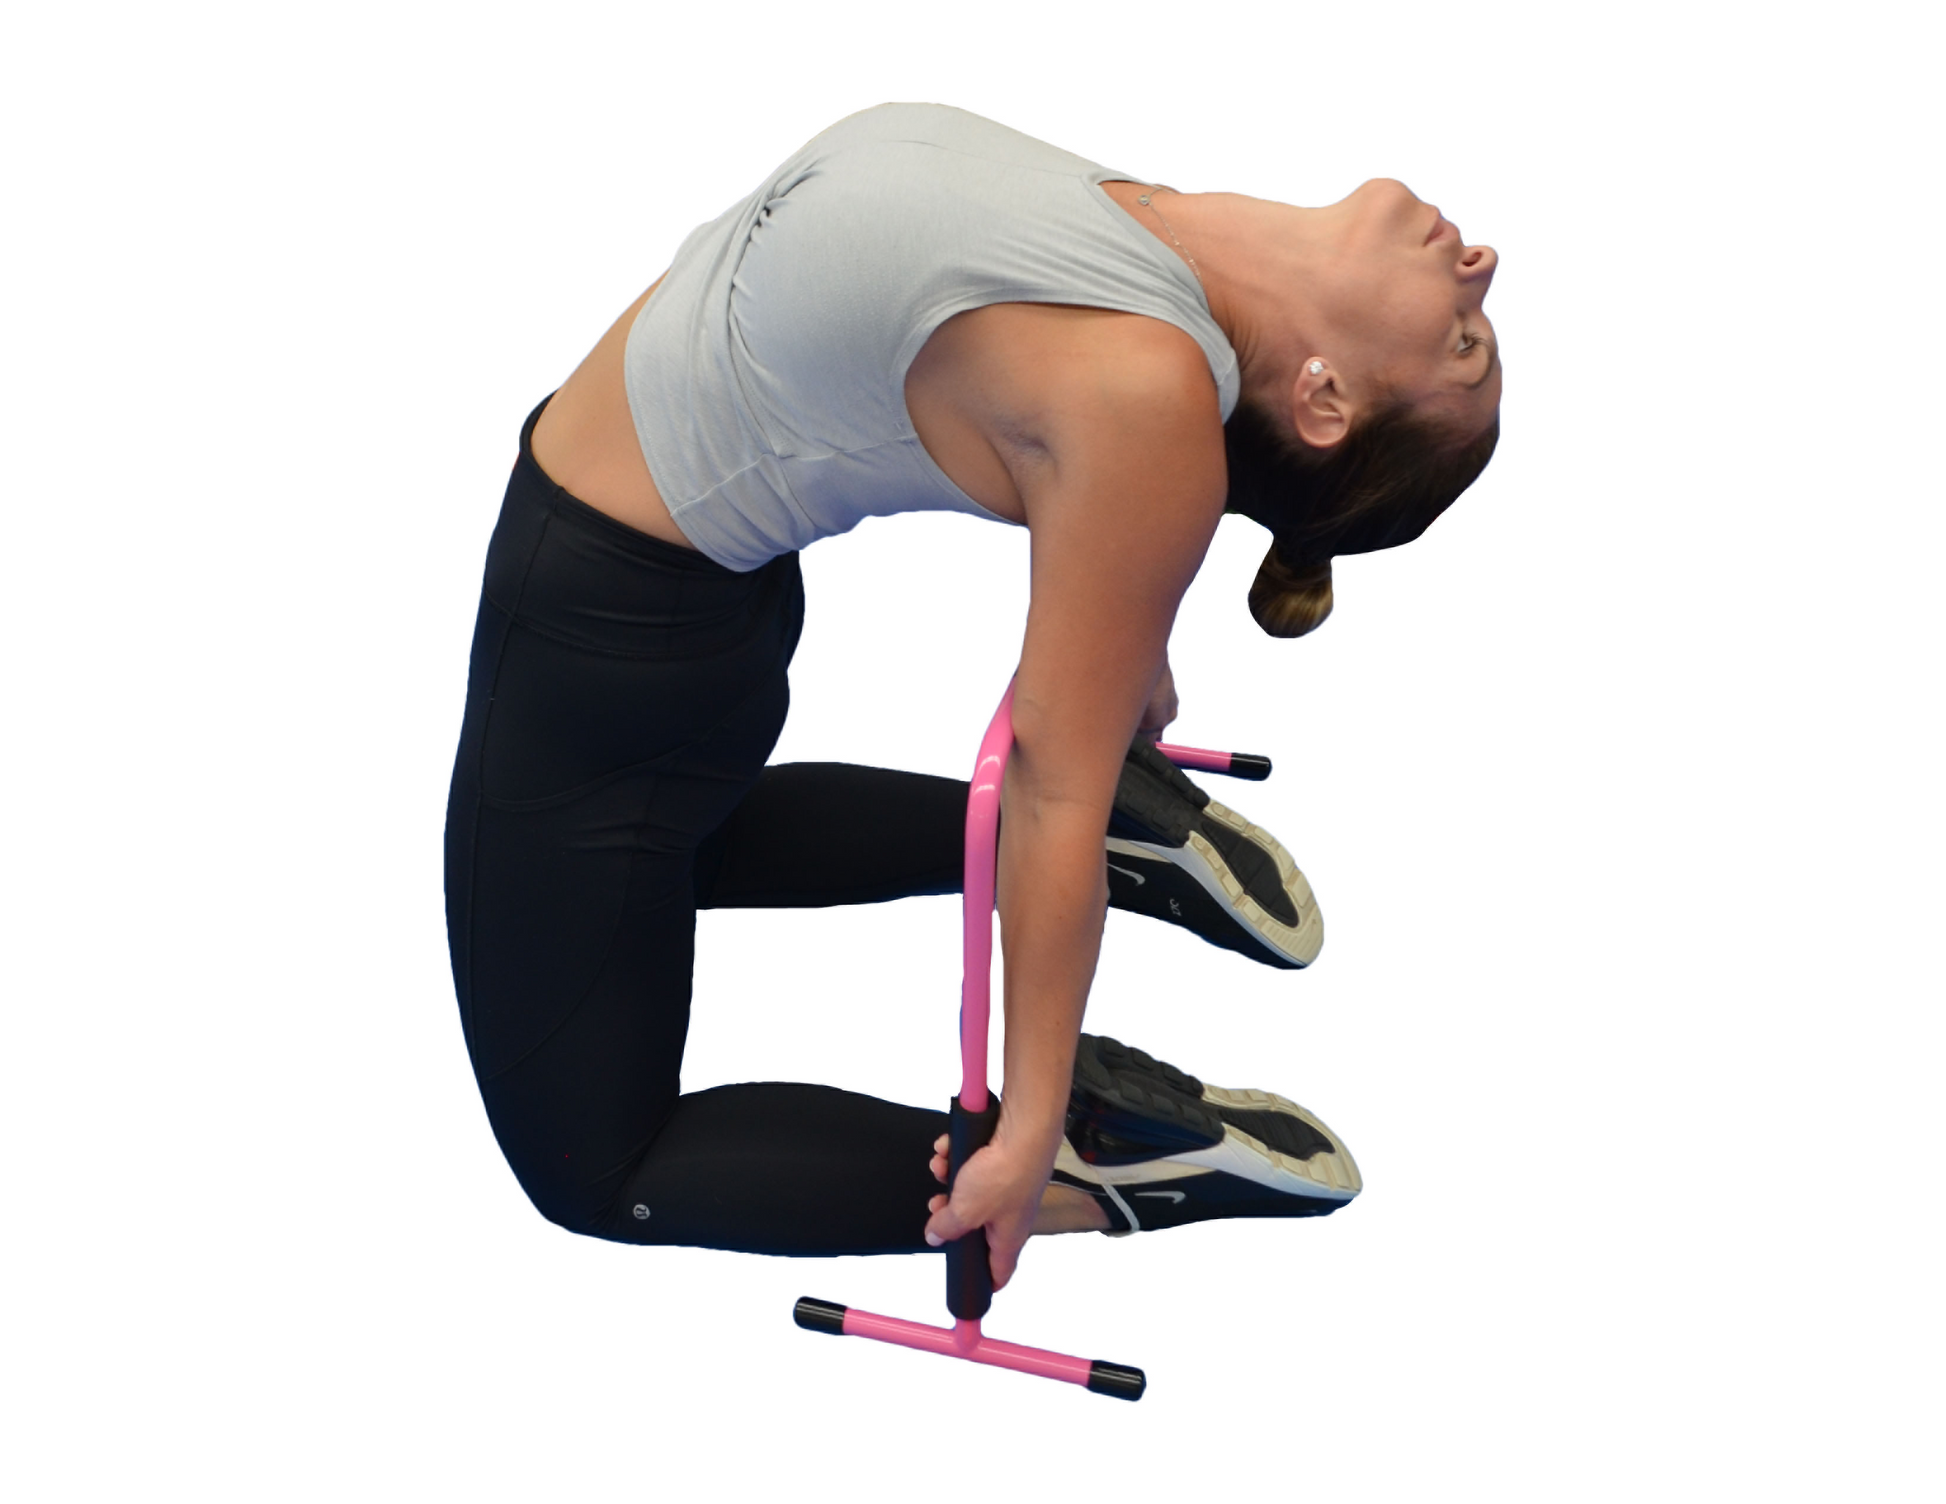 Stretch Out Strap w/ Poster, Stretching Products